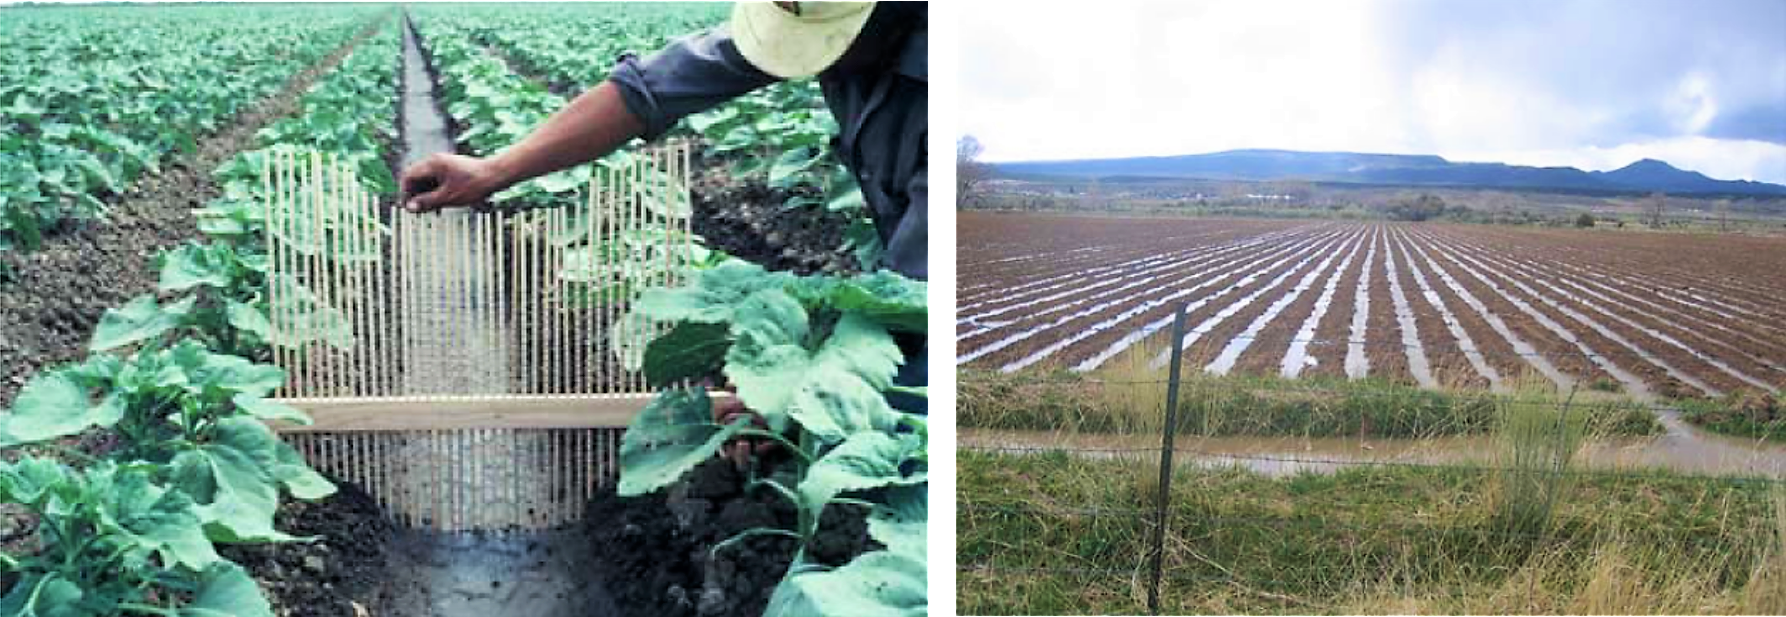 Left: Measuring of a single furrow shape. Right: A field irrigated by furrows. Source: WALKER (2003) and HILL et al. (2008)